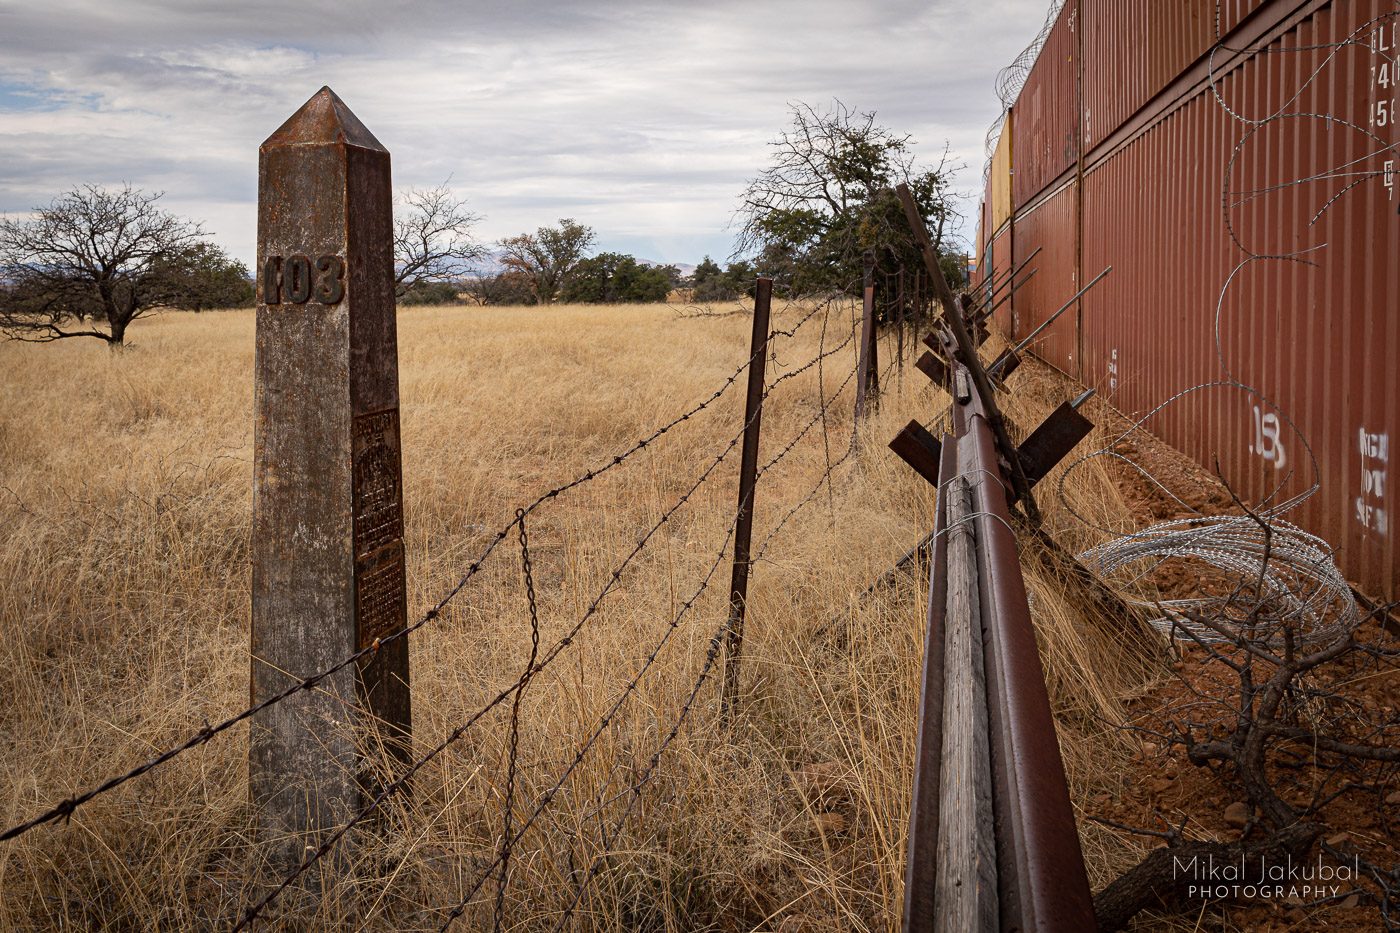 Looking into the distance along the border wall. To the far left, a concrete obelisk with the number "103" stands in the grass. Next to it is a barbed wire cattle fence. Center frame is a 3-foot tall barrier made from welded railroad rails. To the right is a line of double-stacked shipping containers. A shiny new roll of concertina wire loops down from the top of the containers.